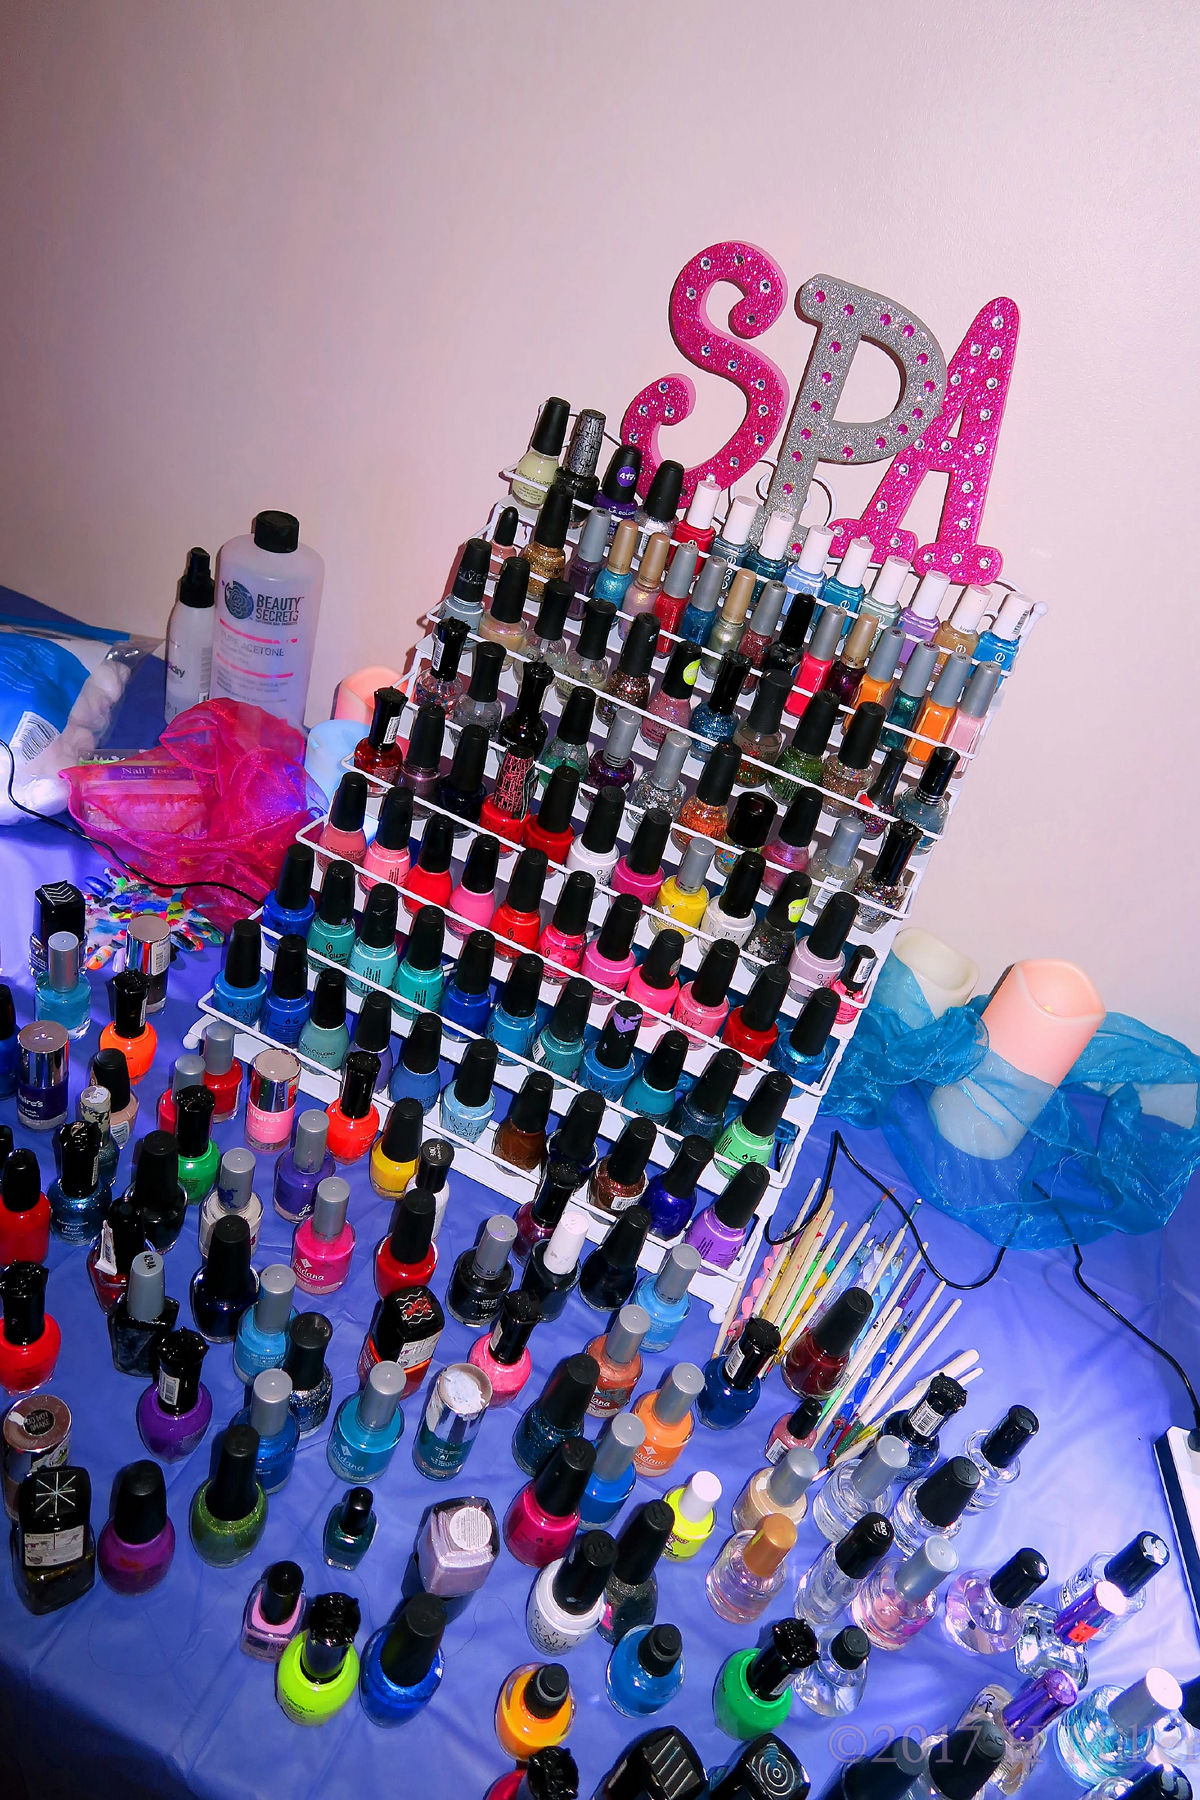 The Kids Nail Spa Is All Ready With Lots Of Nail Polish Colors! 